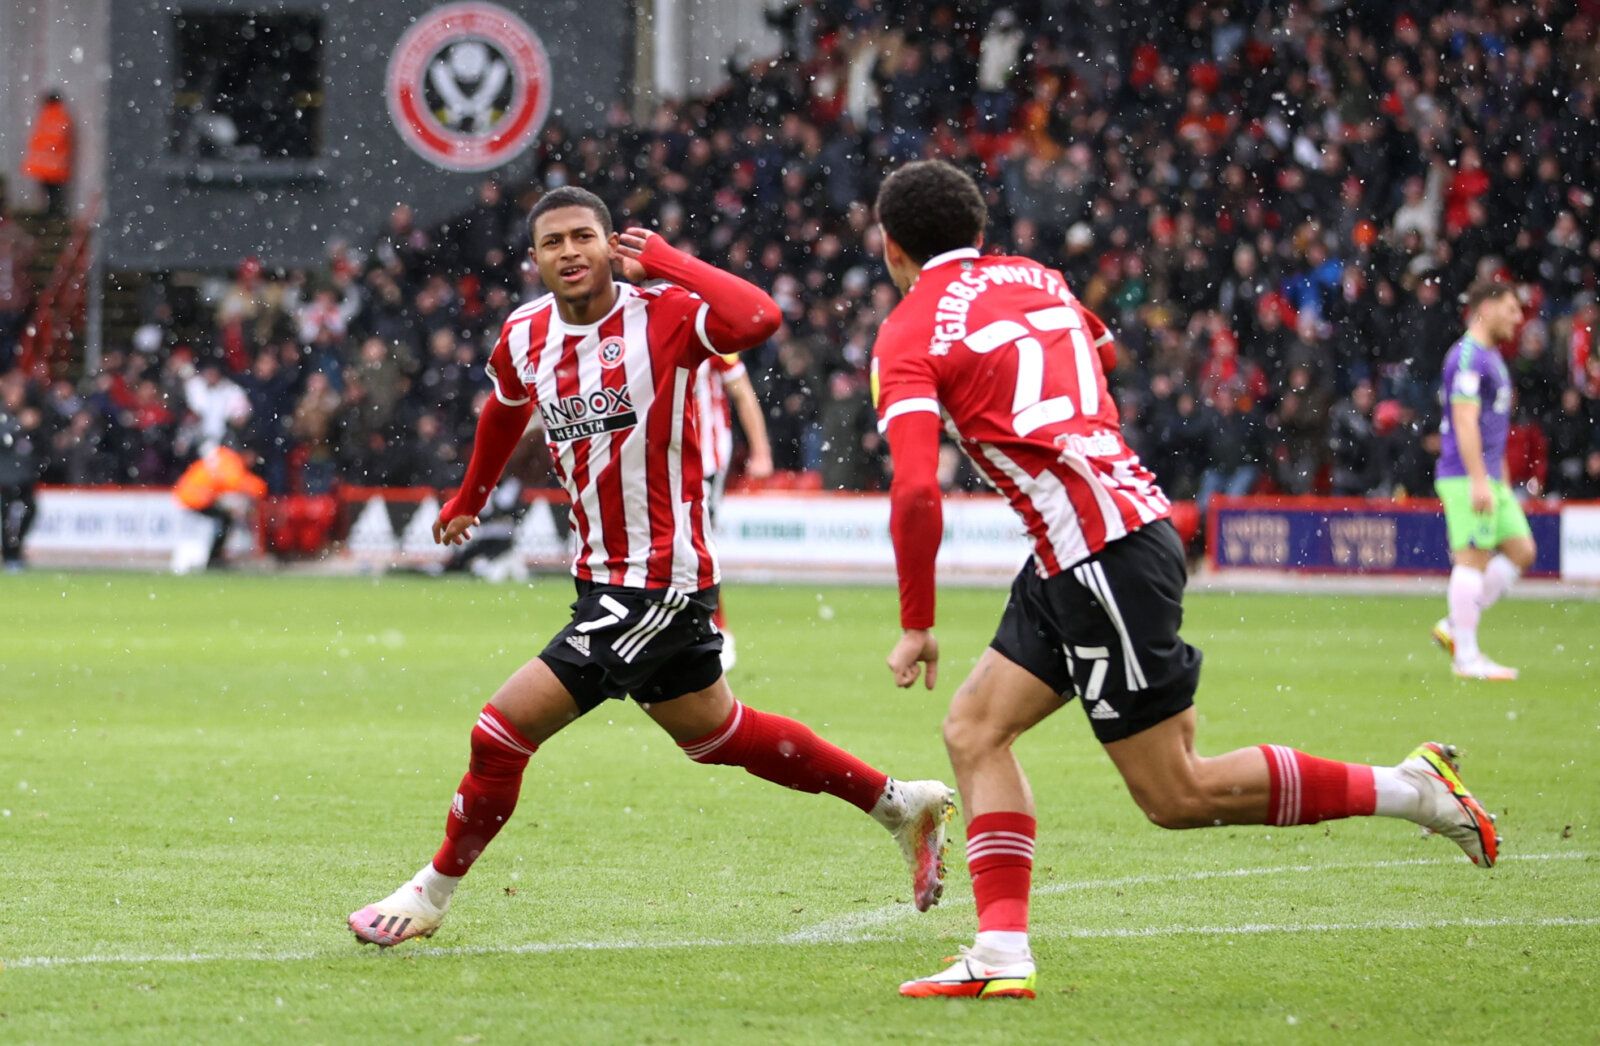 Soccer Football - Championship - Sheffield United v Bristol City - Bramall Lane, Sheffield, Britain - November 28, 2021 Sheffield United's Rhian Brewster celebrates scoring their first goal Action Images/Molly Darlington EDITORIAL USE ONLY. No use with unauthorized audio, video, data, fixture lists, club/league logos or 'live' services. Online in-match use limited to 75 images, no video emulation. No use in betting, games or single club /league/player publications.  Please contact your account r